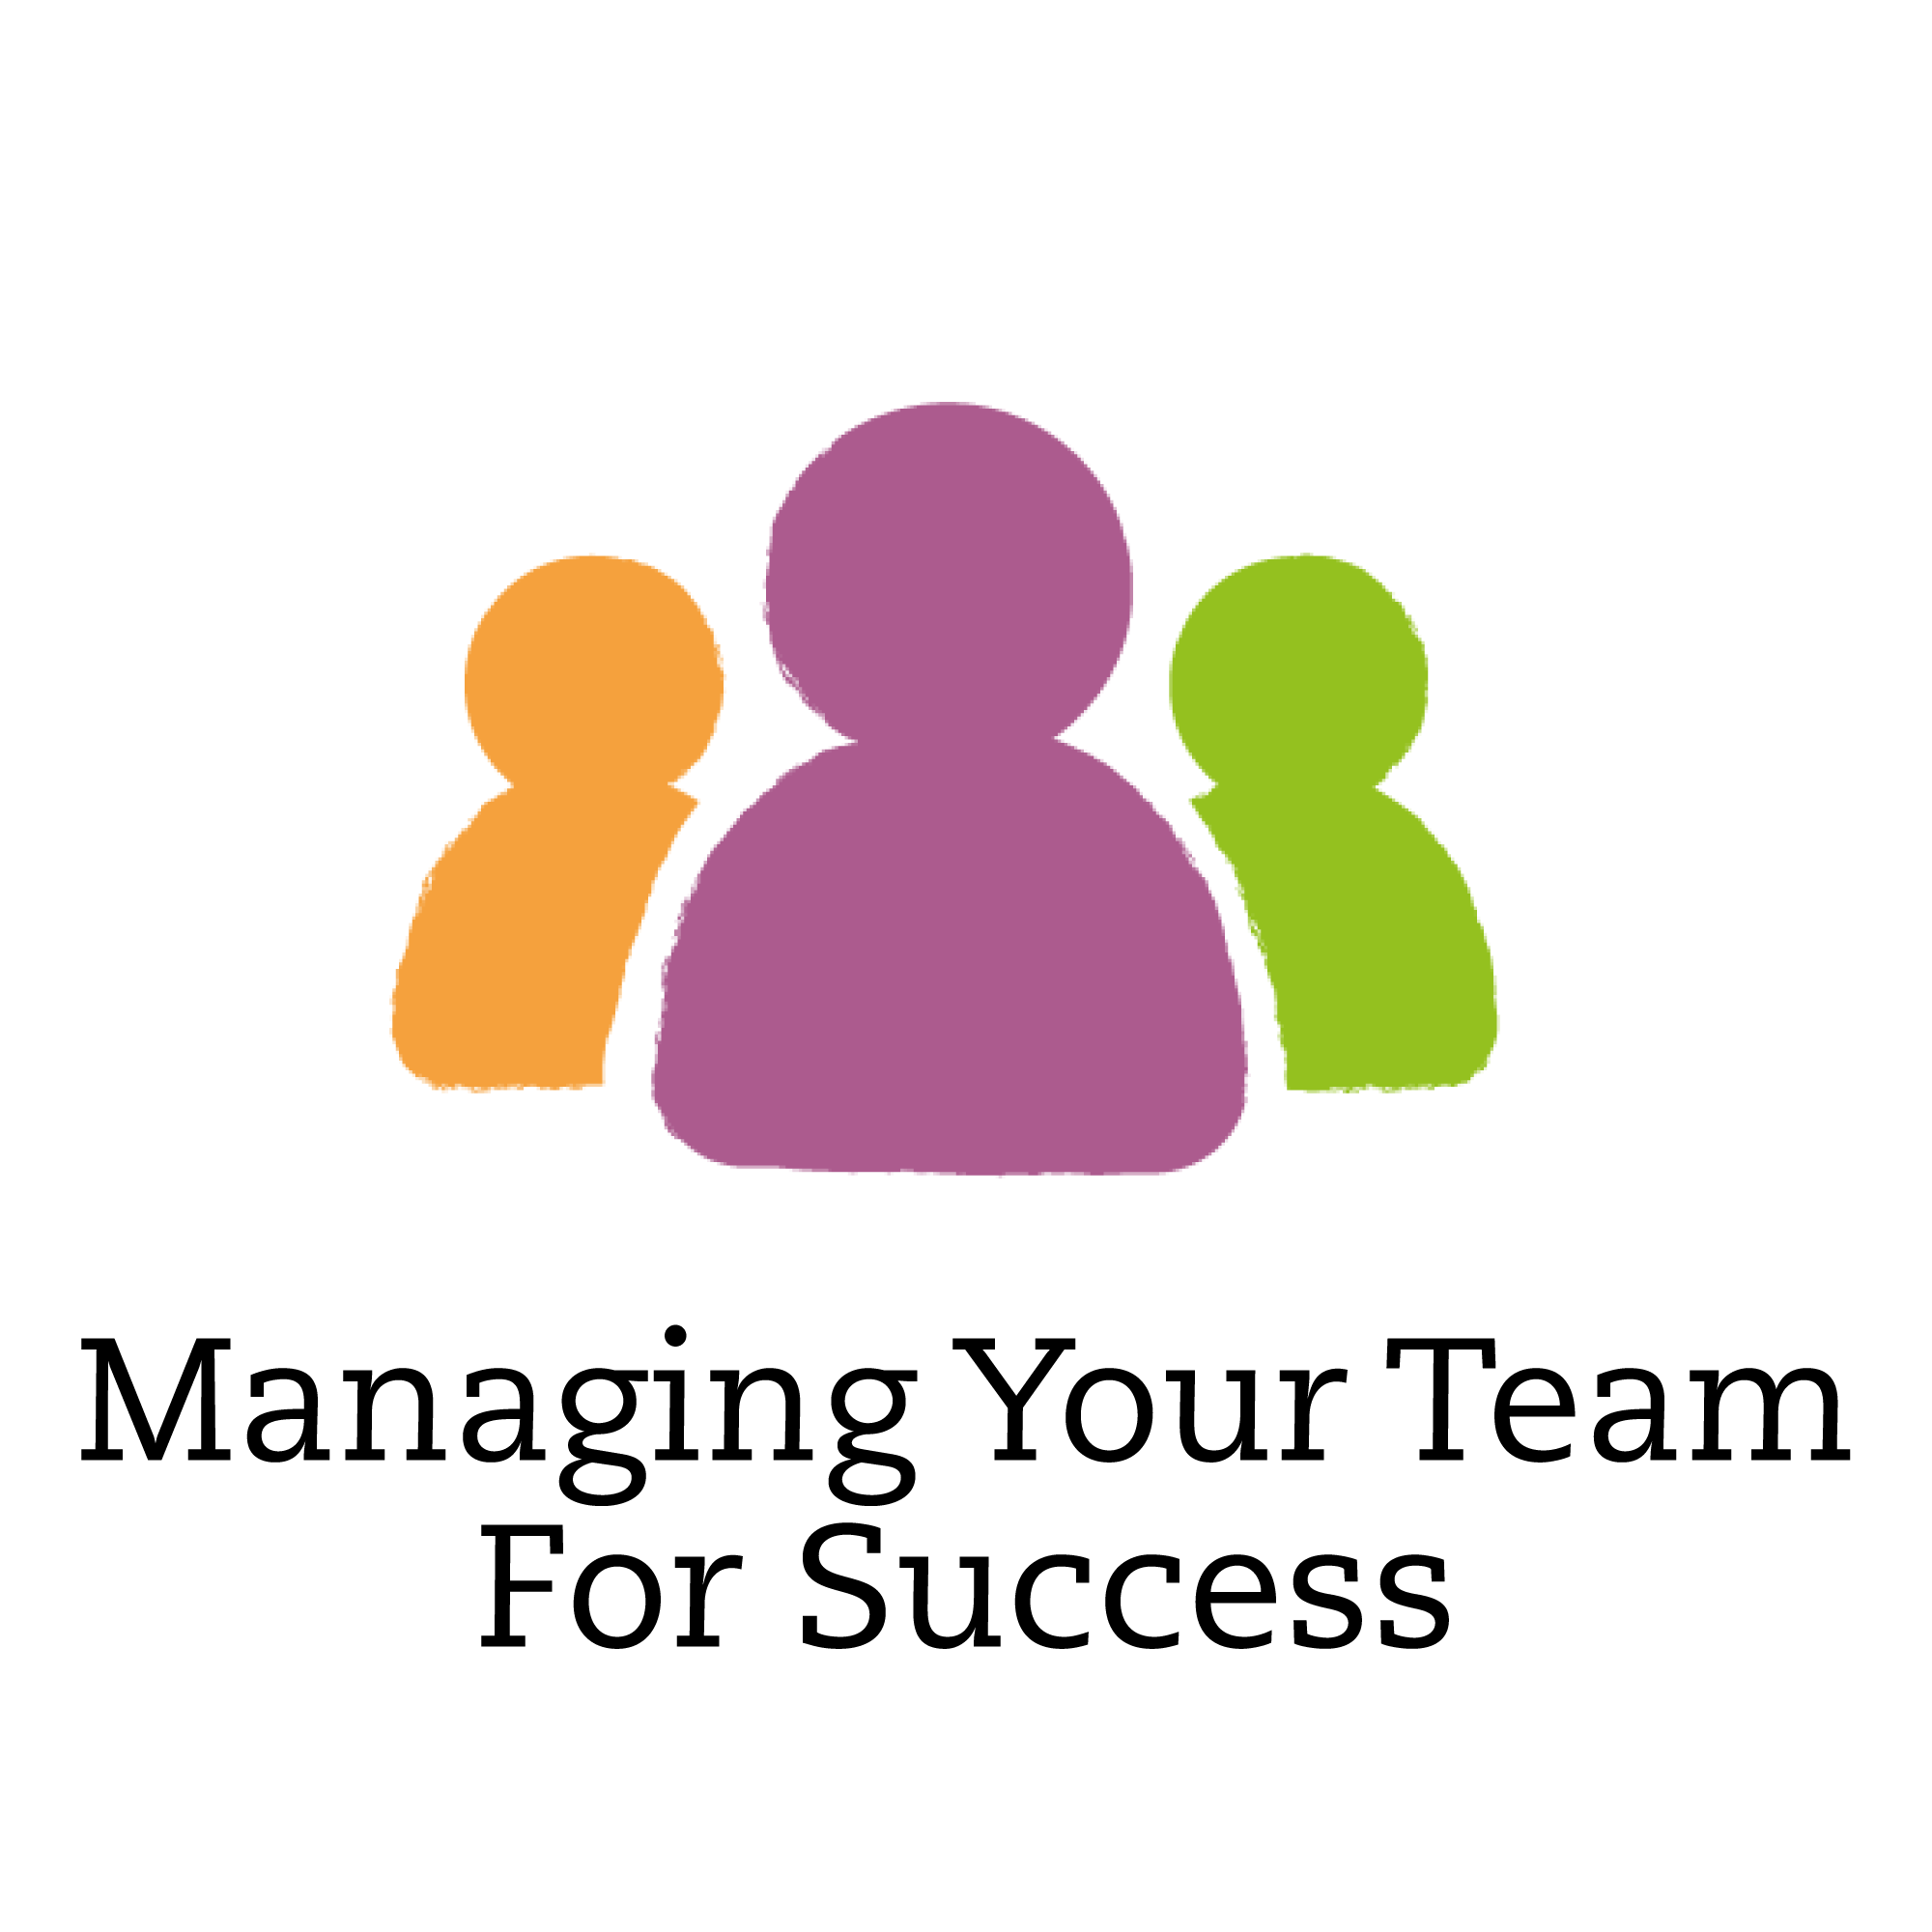 Remote, face-to-face or hybrid service teams – managing your team for success through change (9 Feb)